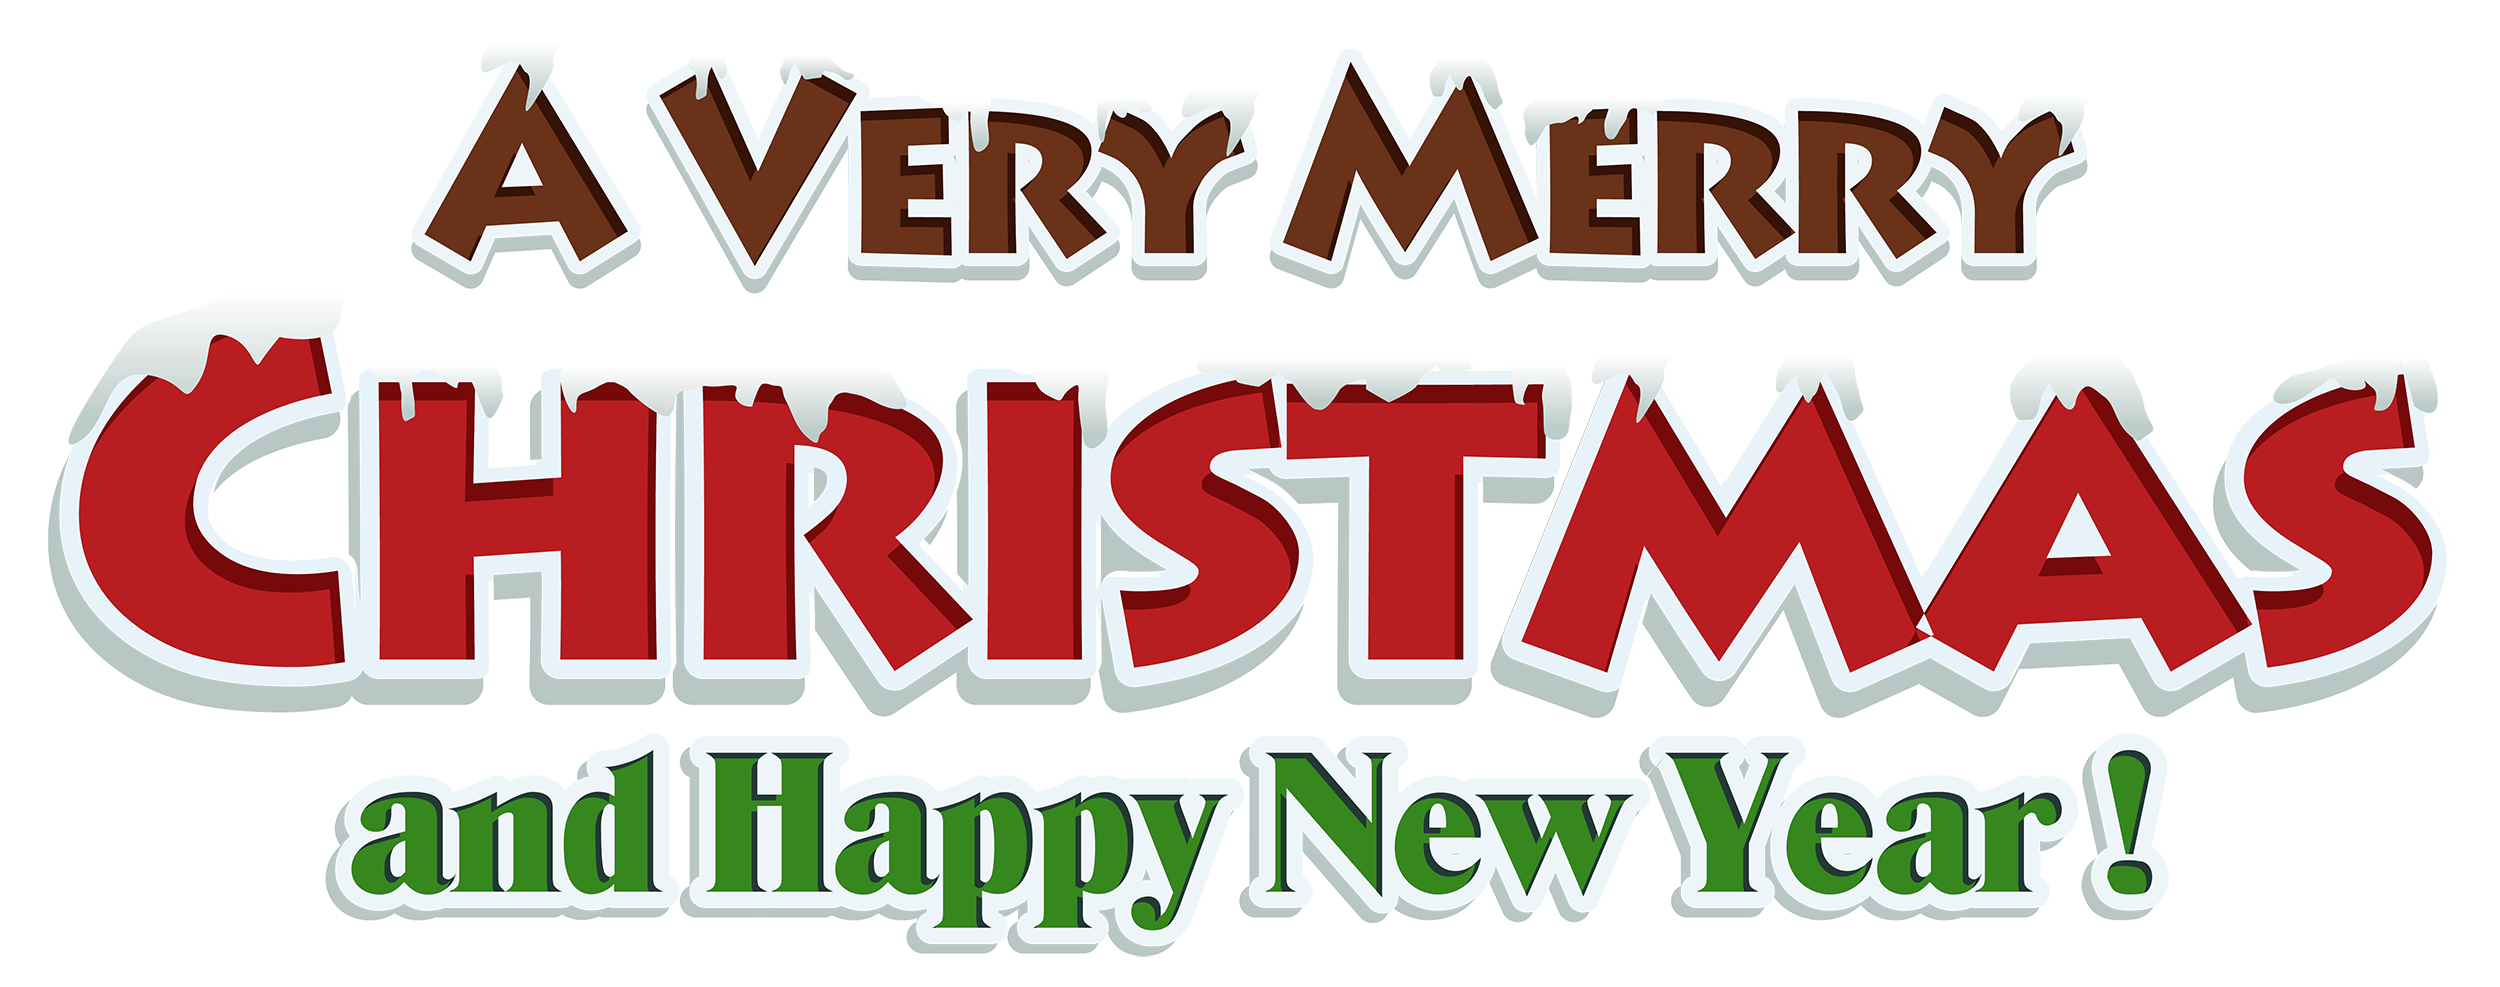 A Very Merry Christmas and Happy New Year PNG Image in Transparent